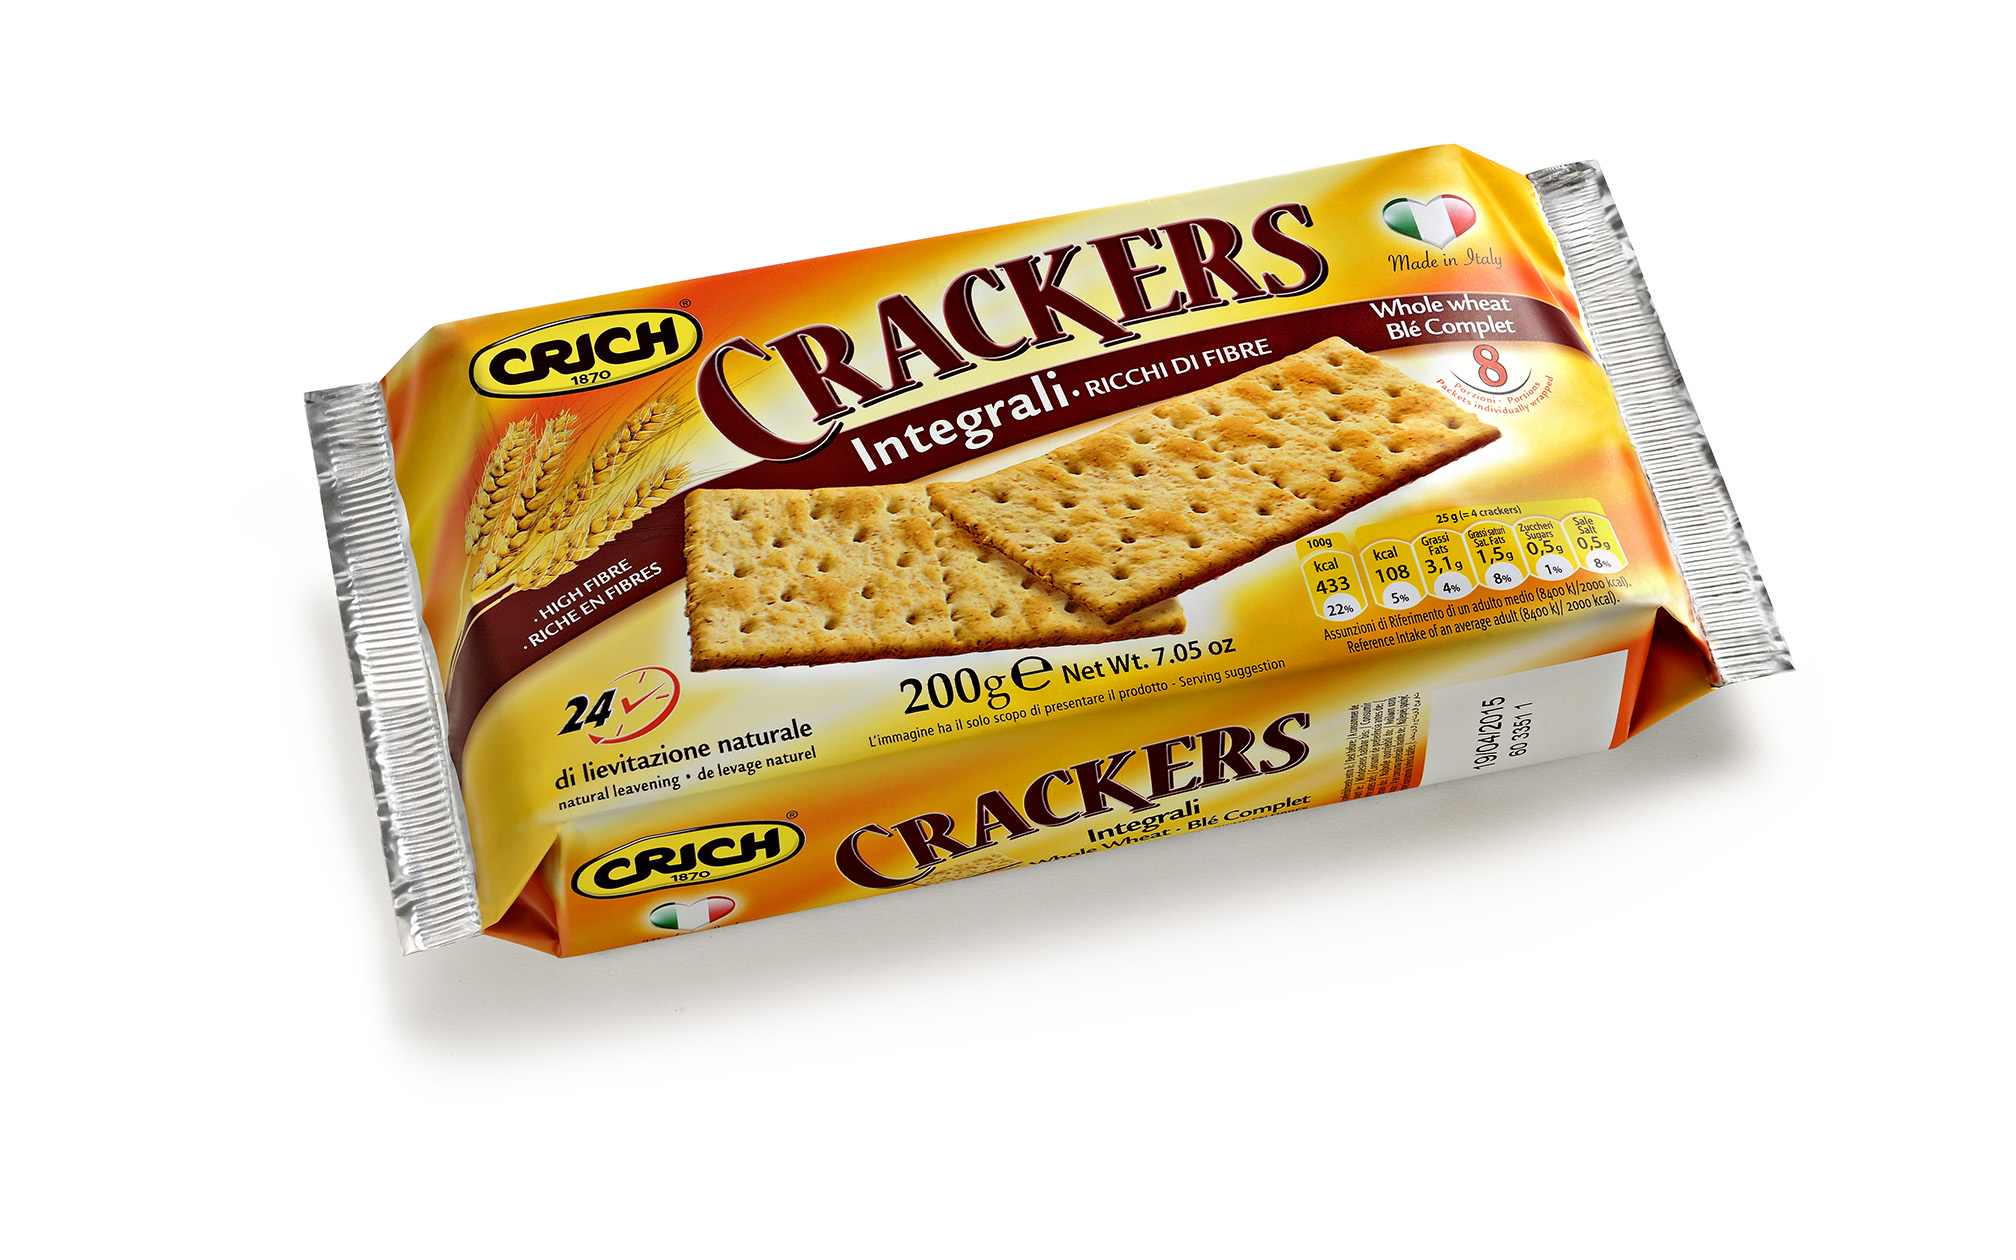 WHOLE WHEAT CRACKERS 200G